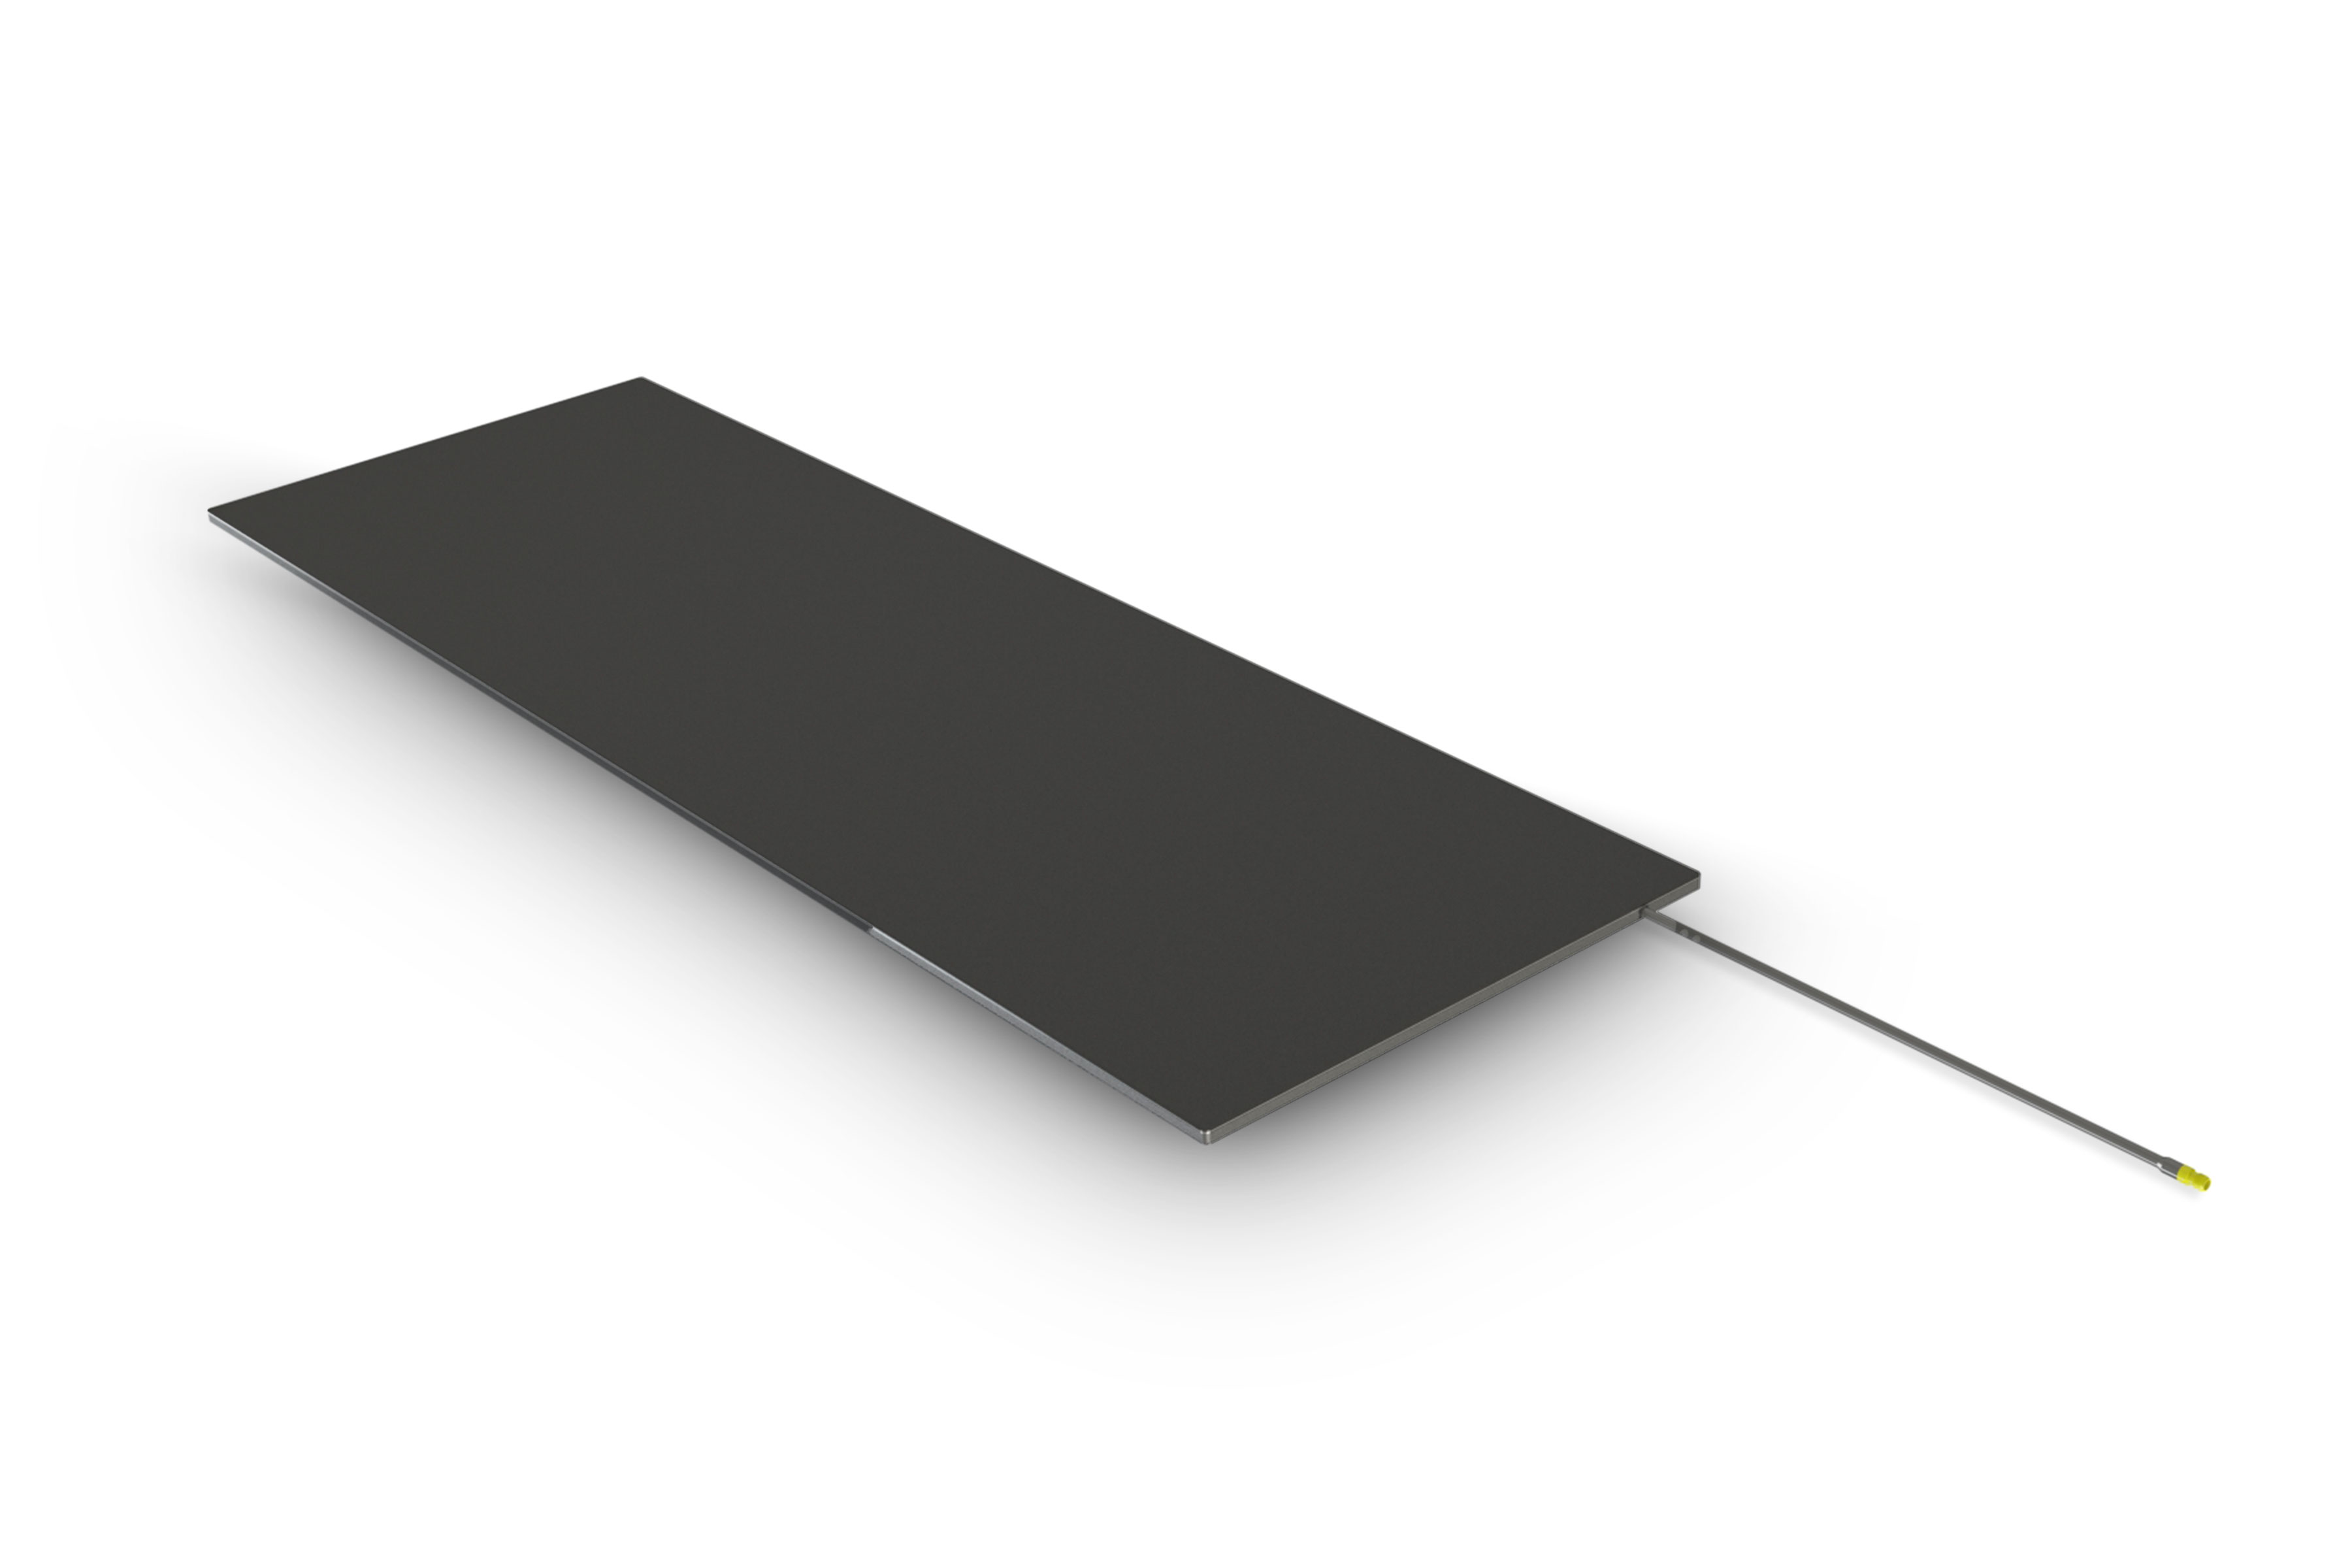 Zebra AN650 mat RFID antenna with low profile capable of lying flat on the ground 